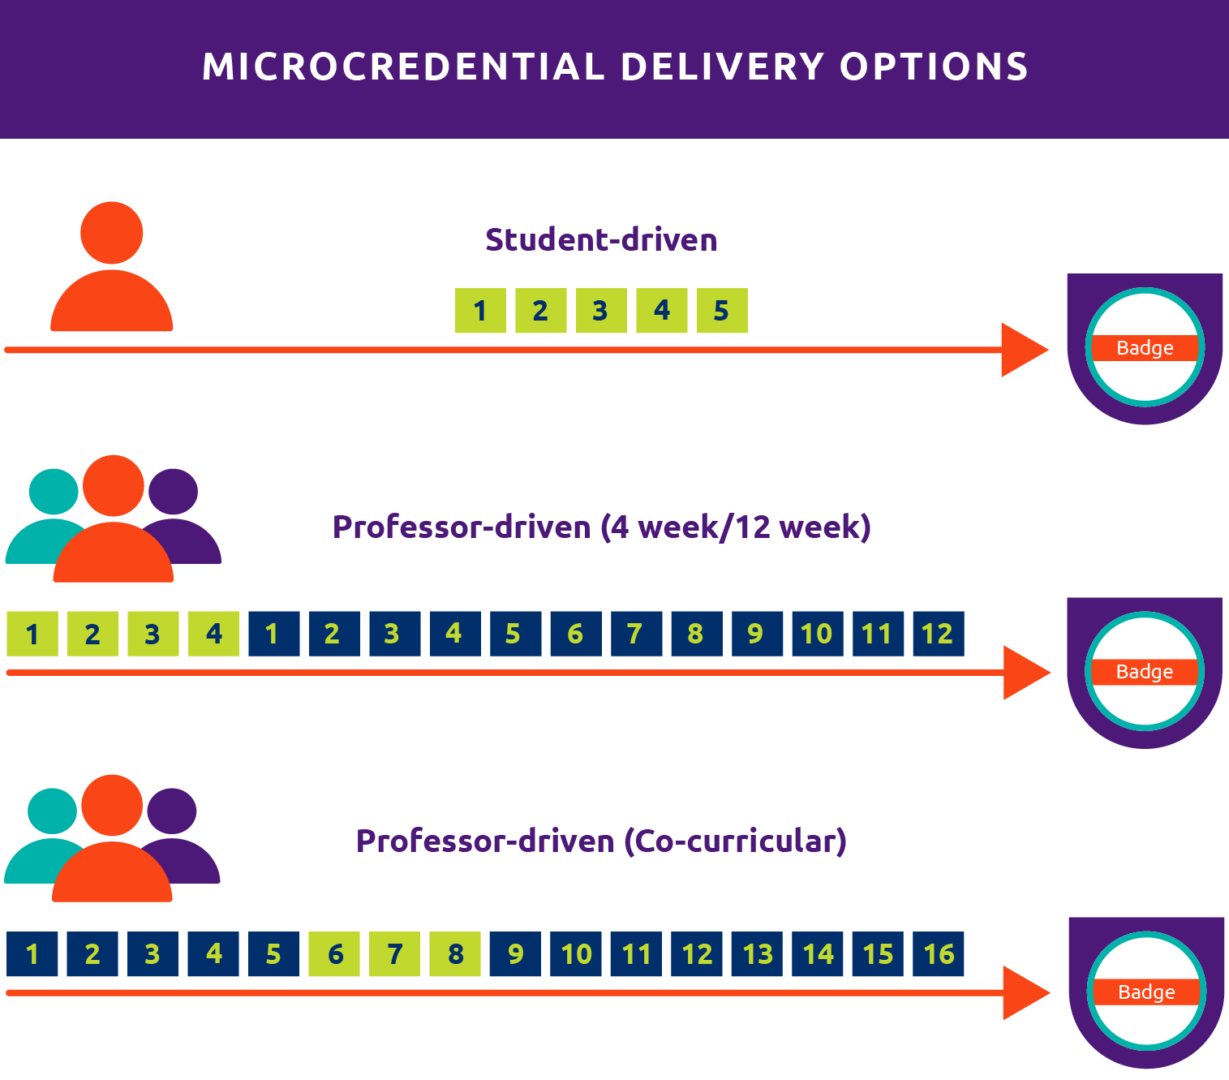 Illustration for the three options for microcredential delivery